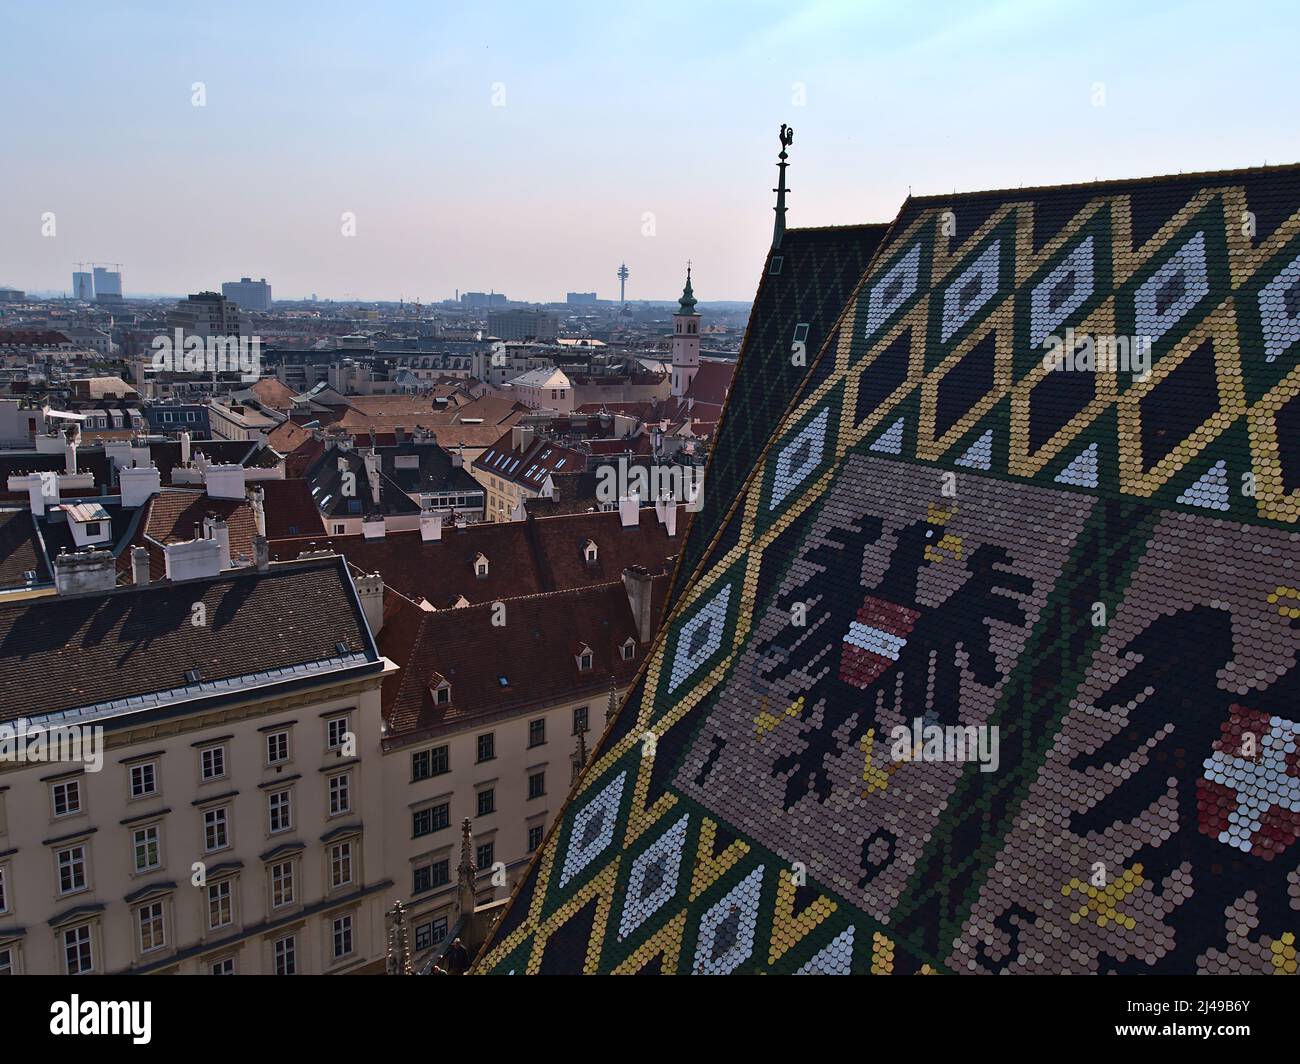 Beautiful high angle view over the historic downtown of Vienna, Austria with the famous tile roof of Stephansdom cathedral in front with coat of arms. Stock Photo